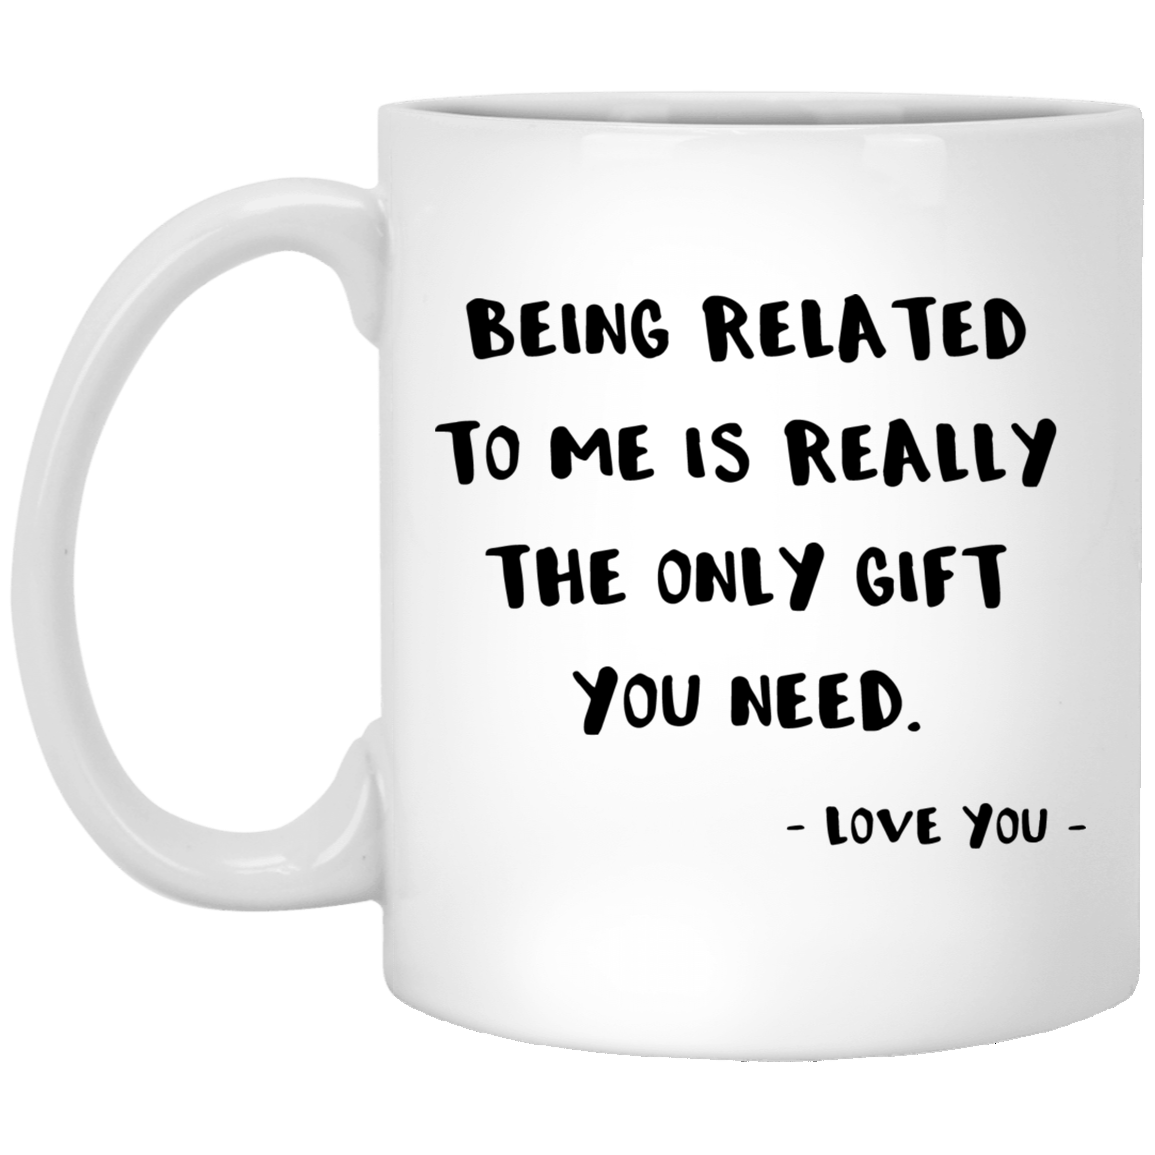 Being Related To Me Is Really The Only Gift You Need 11 oz. White Mug